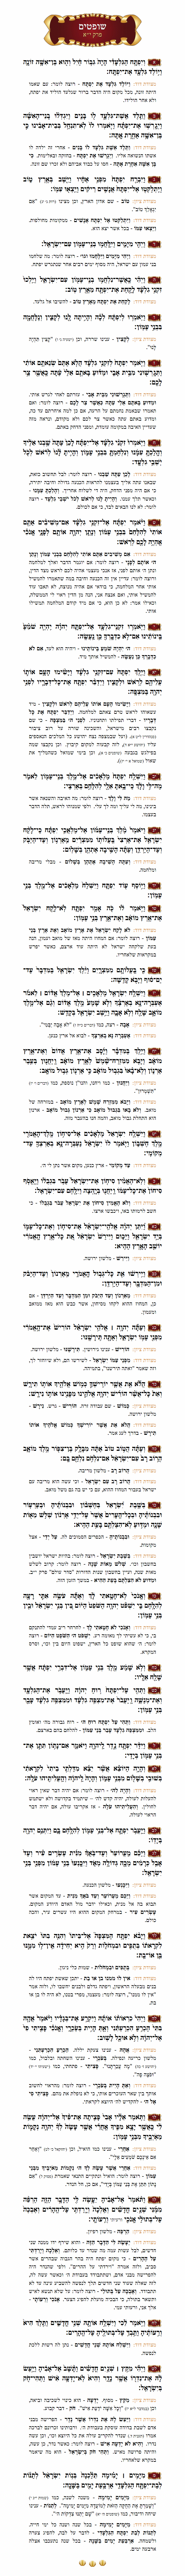 Sefer Shoftim Chapter 11 with commentary